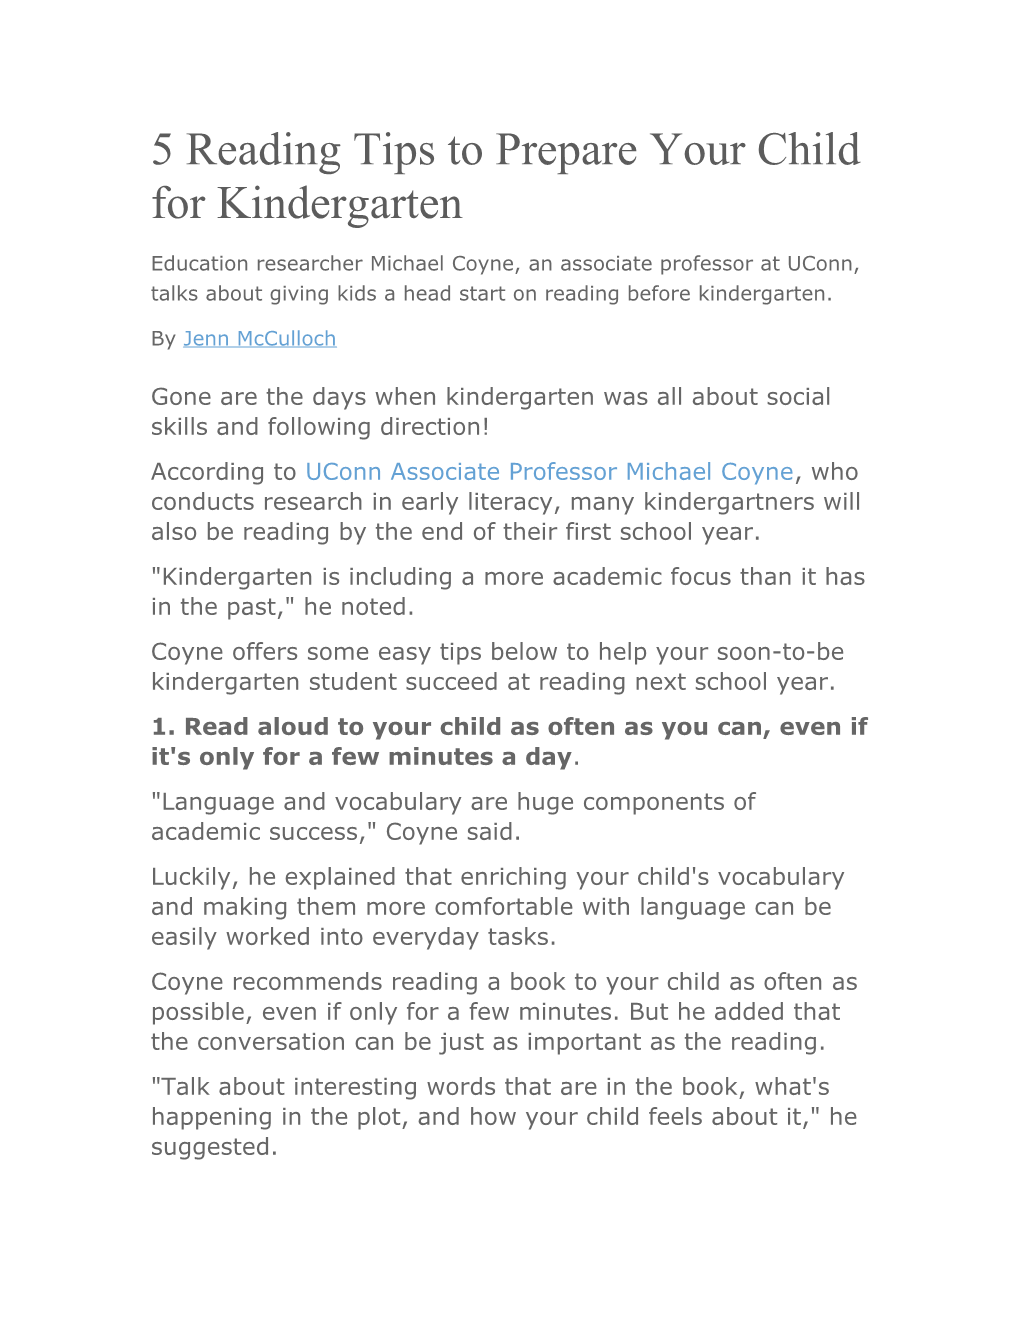 5 Reading Tips to Prepare Your Child for Kindergarten